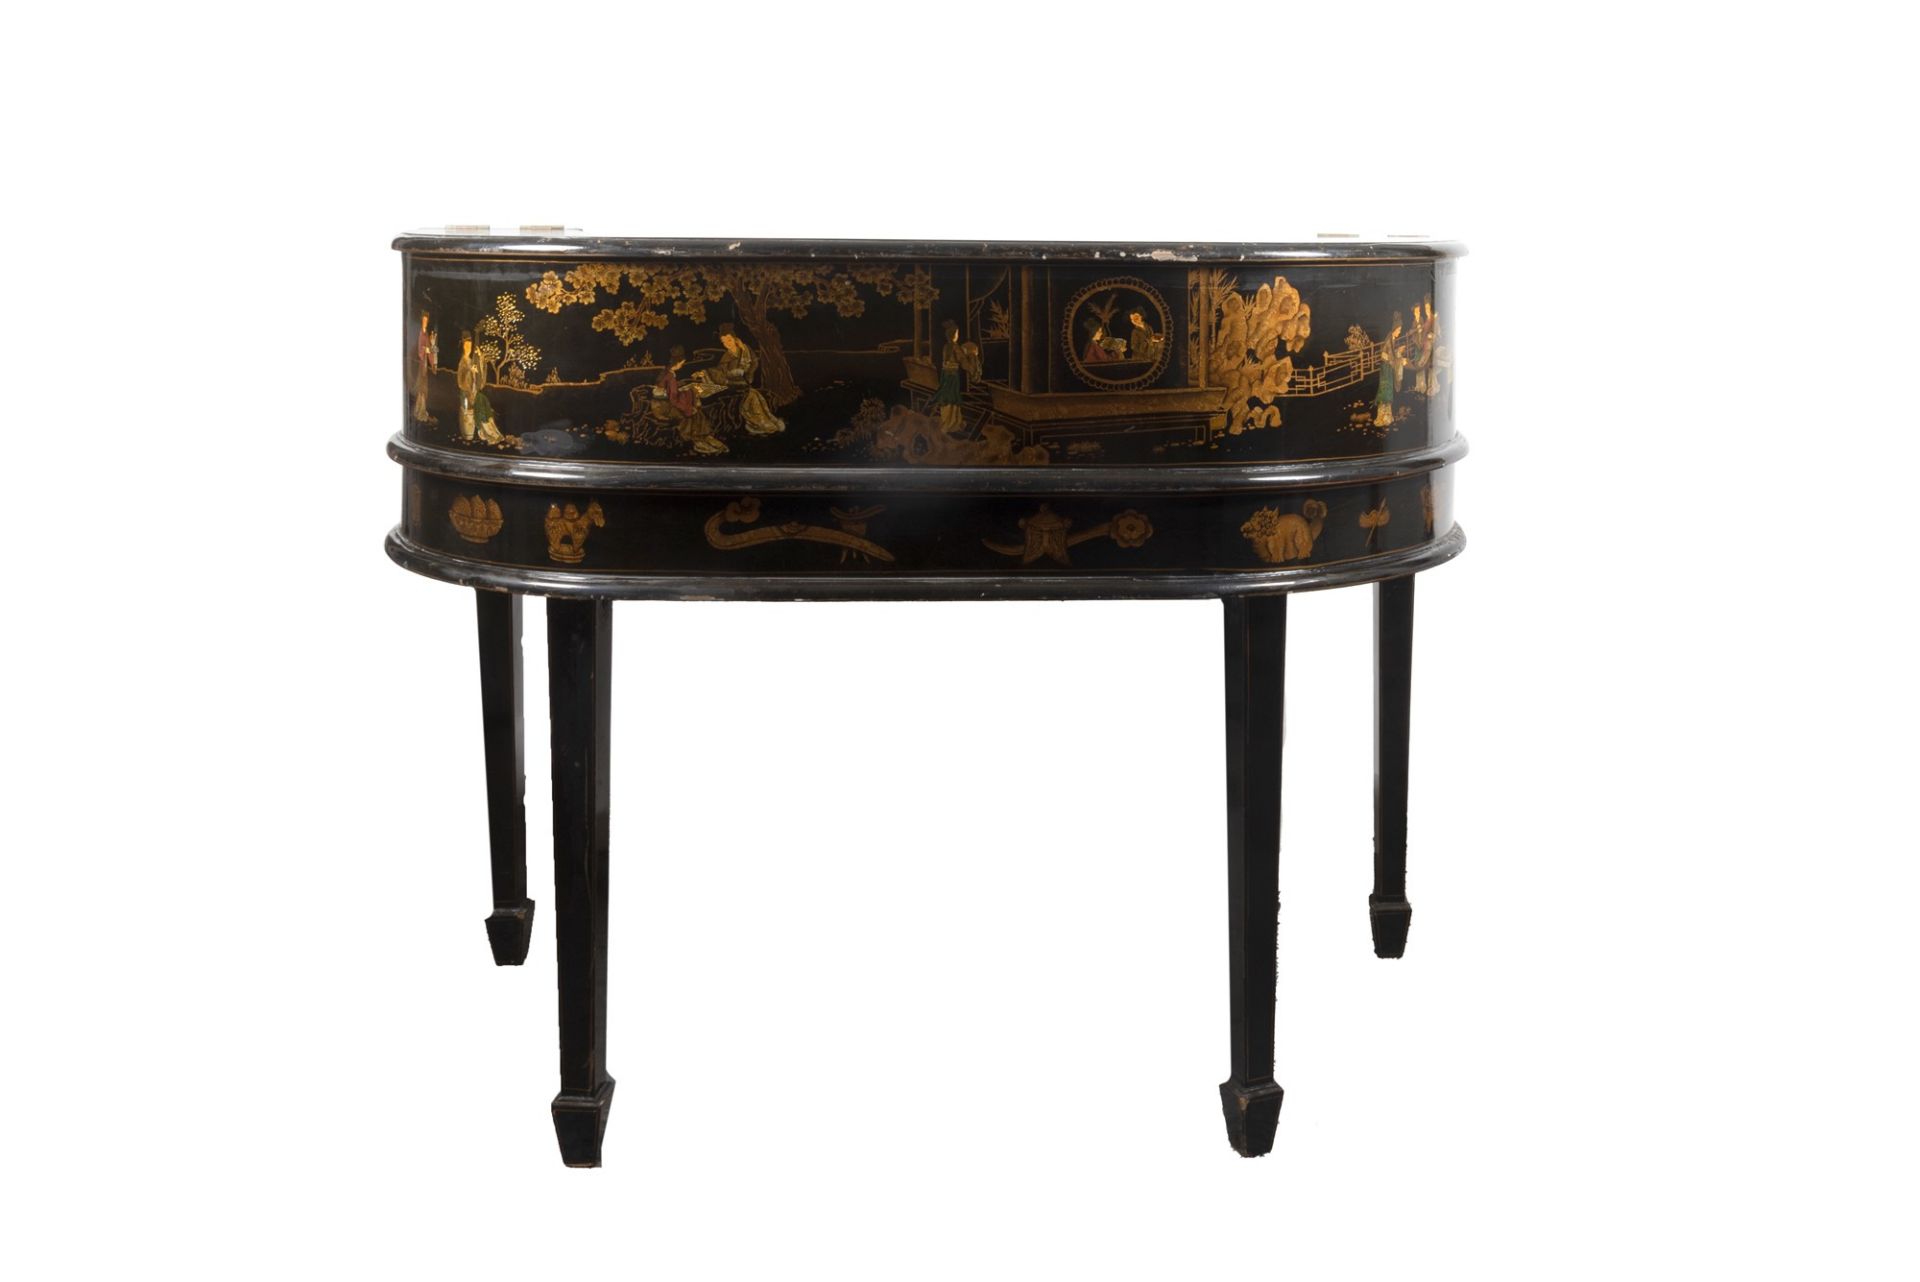 Carlton House desk in black lacquered wood decorated with Chinoserie, early 20th century - Image 5 of 6